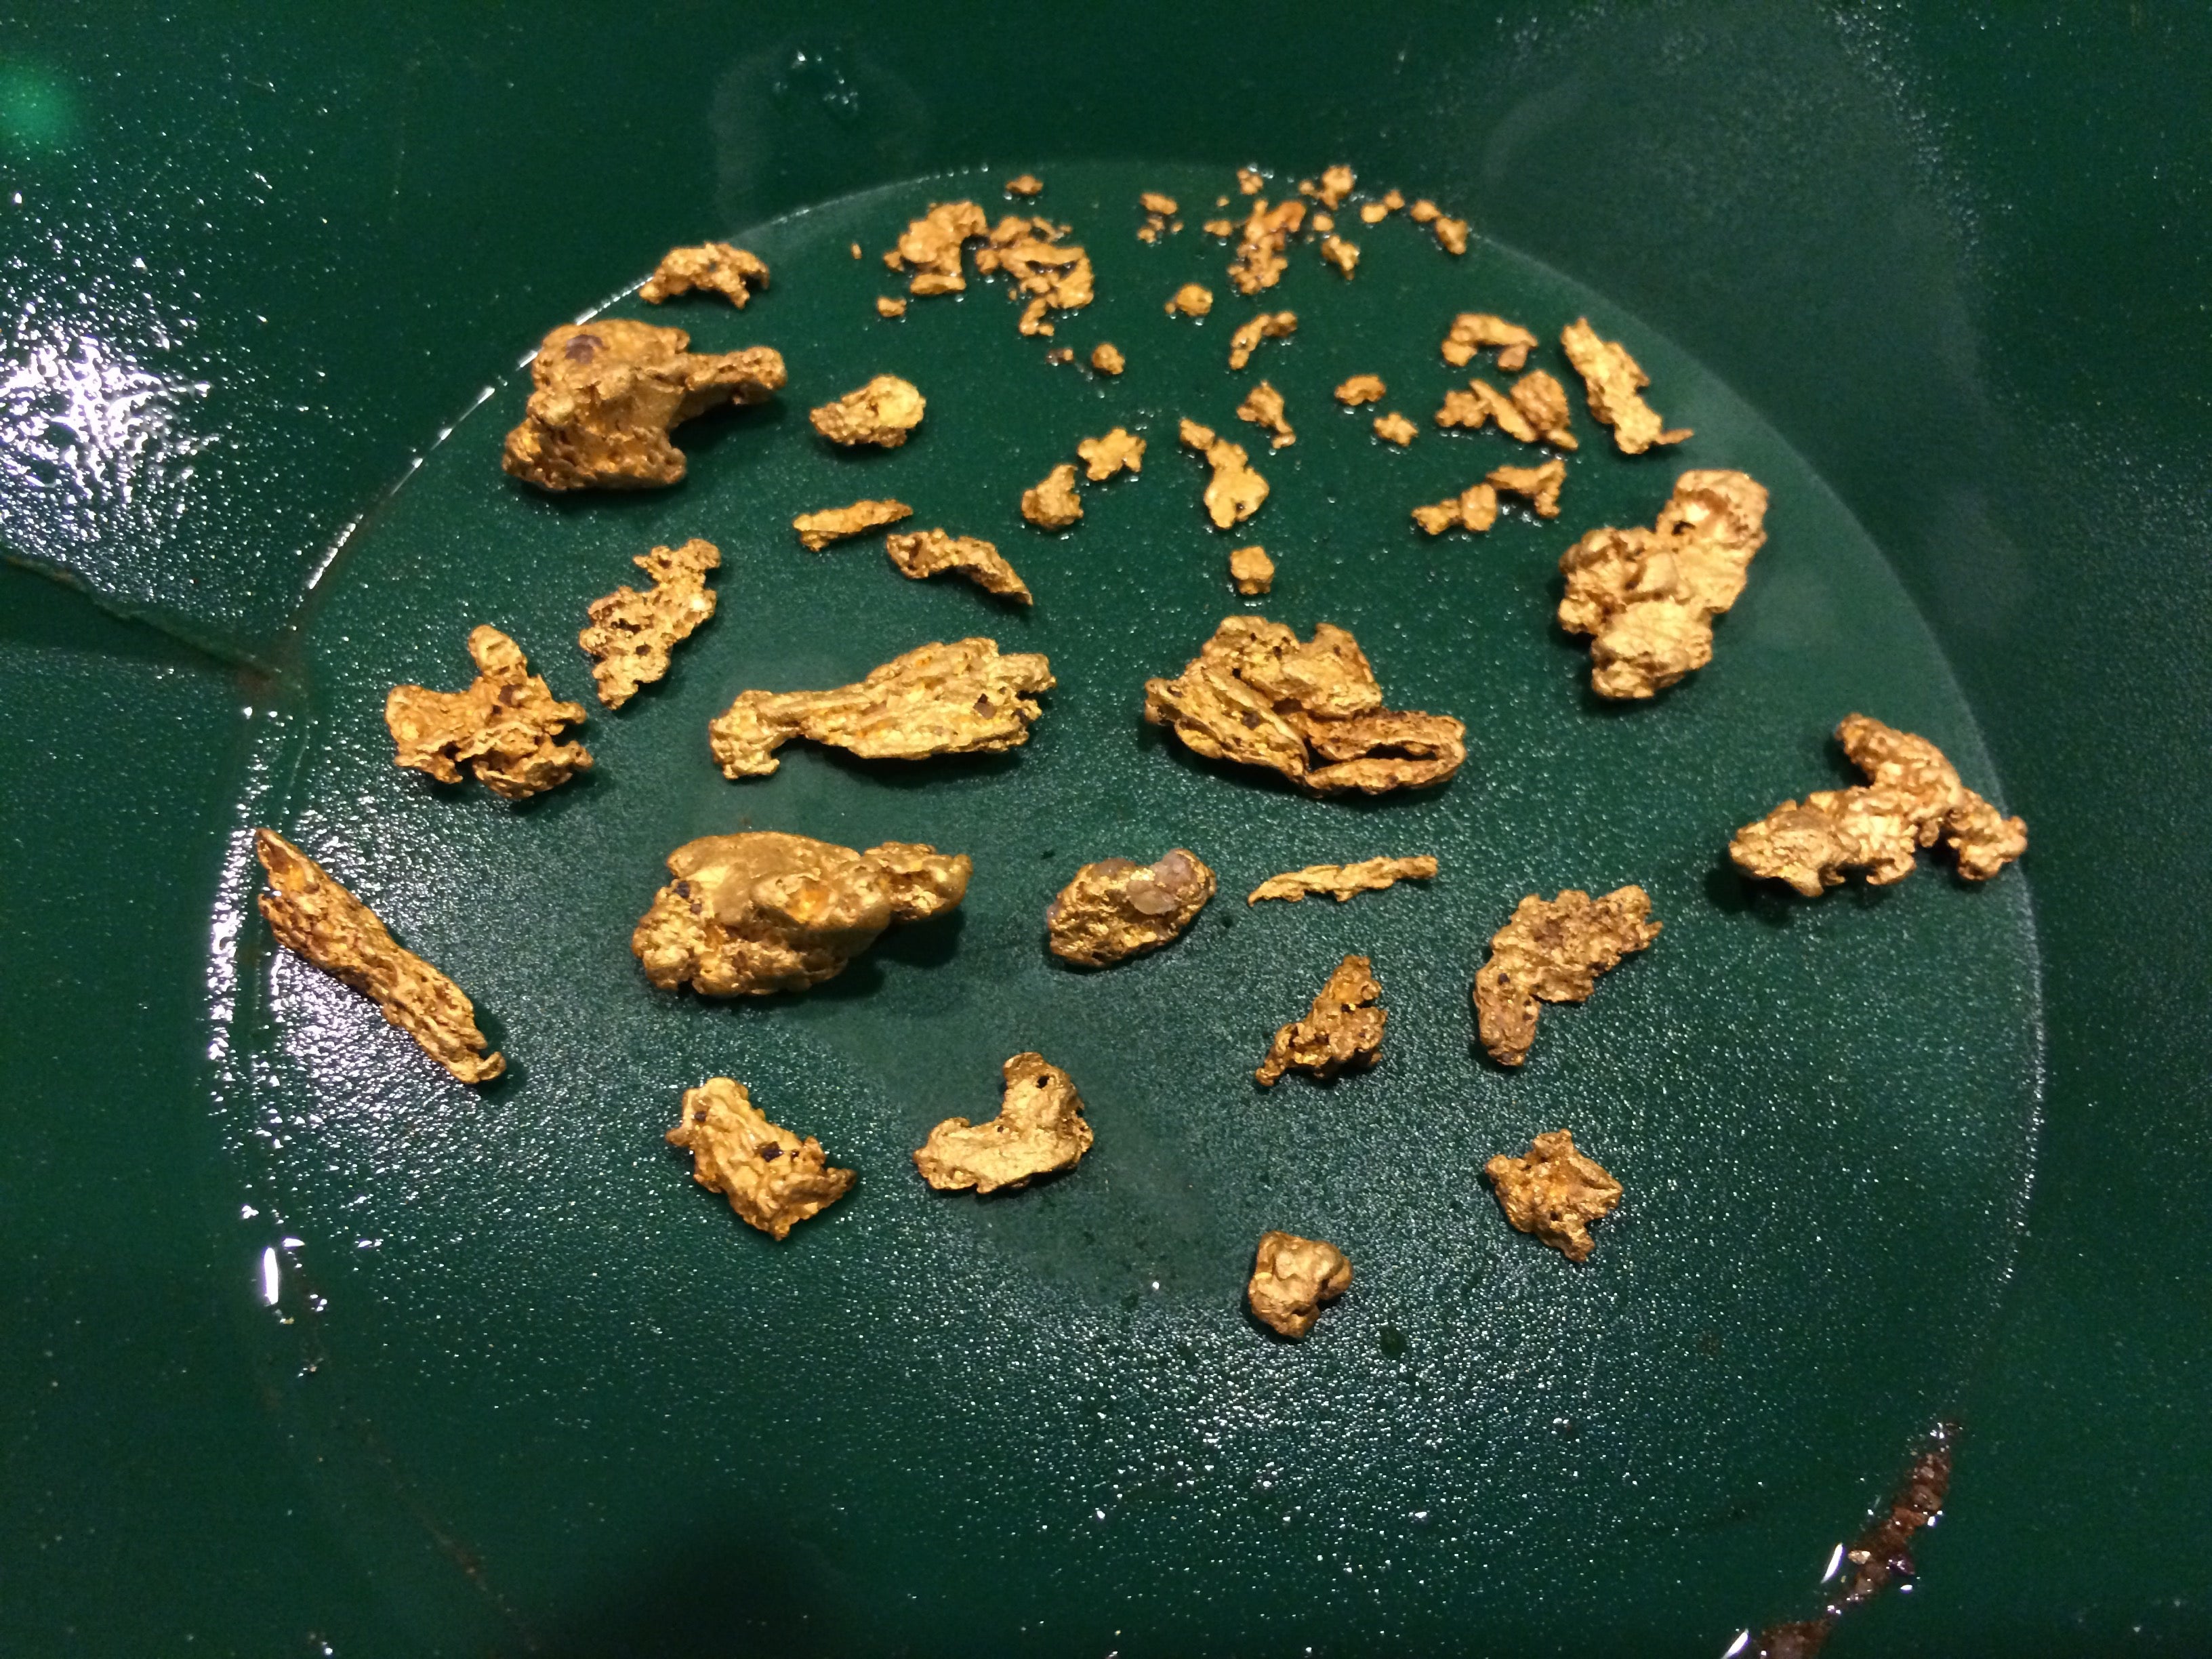 SPECIAL GOLD NUGGET - GOLD PAYDIRT